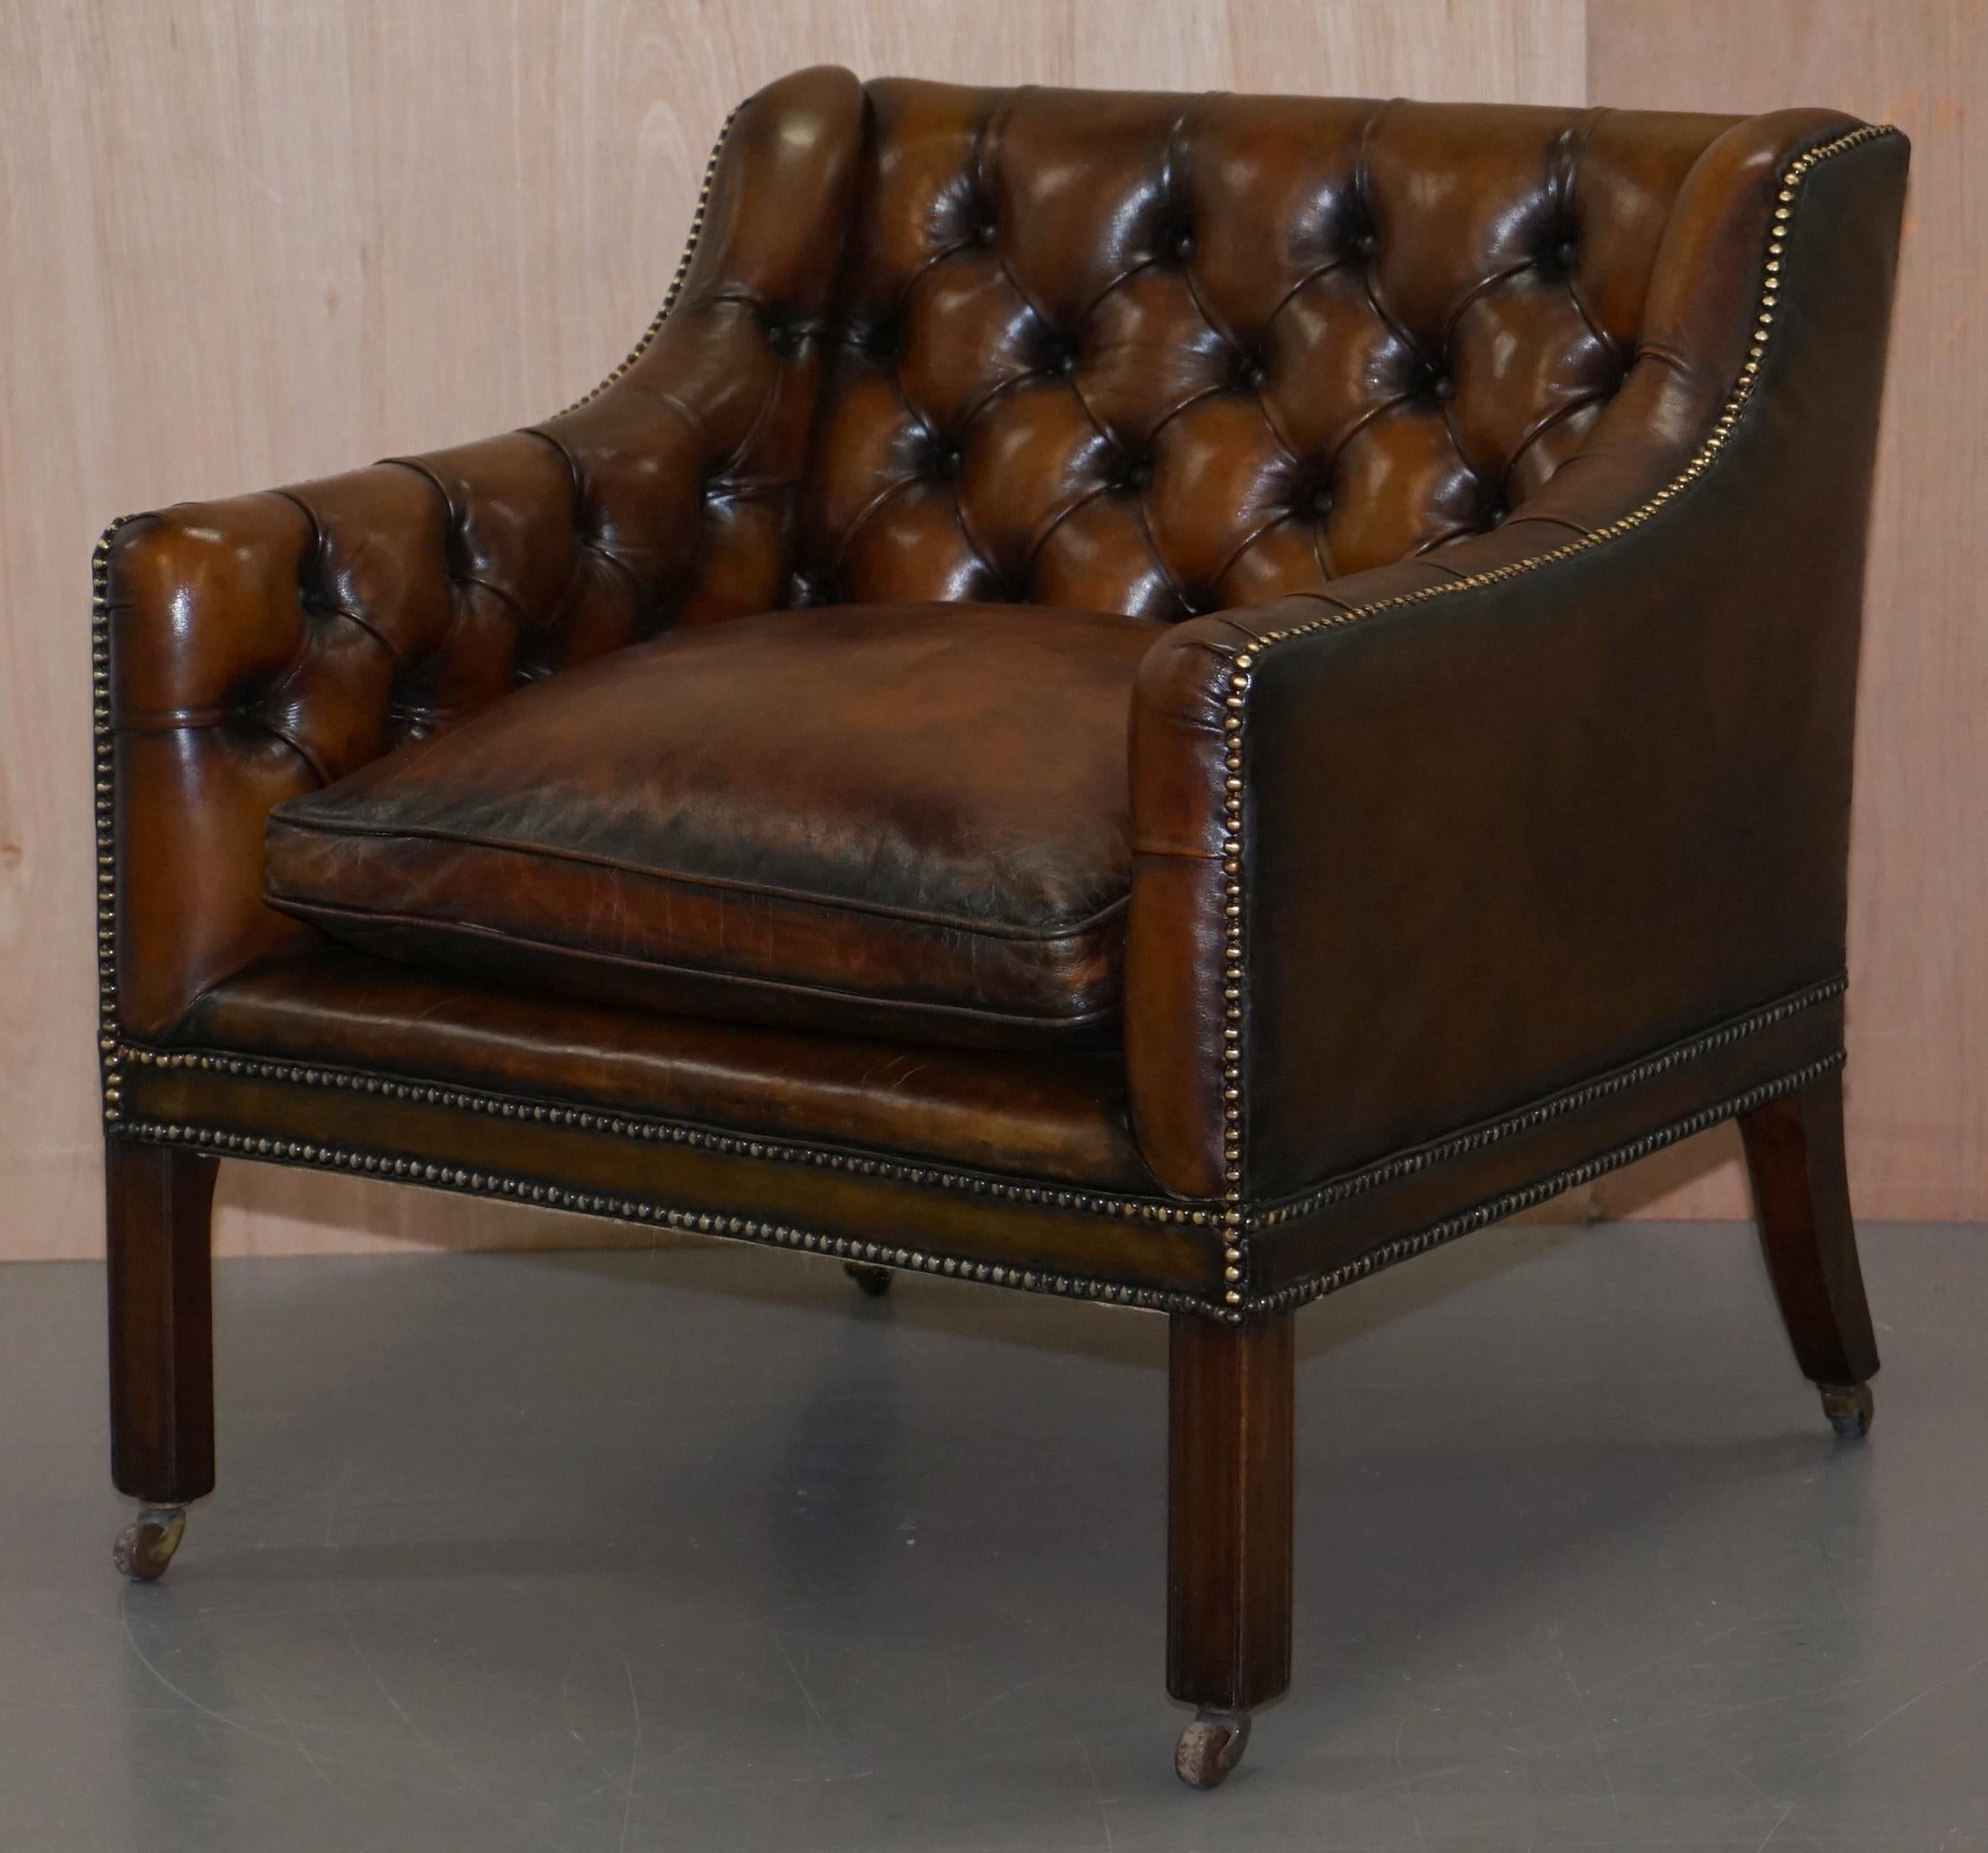 English Pair of Very Rare Chesterfield Lutyen's Style Viceroy's Brown Leather Armchairs